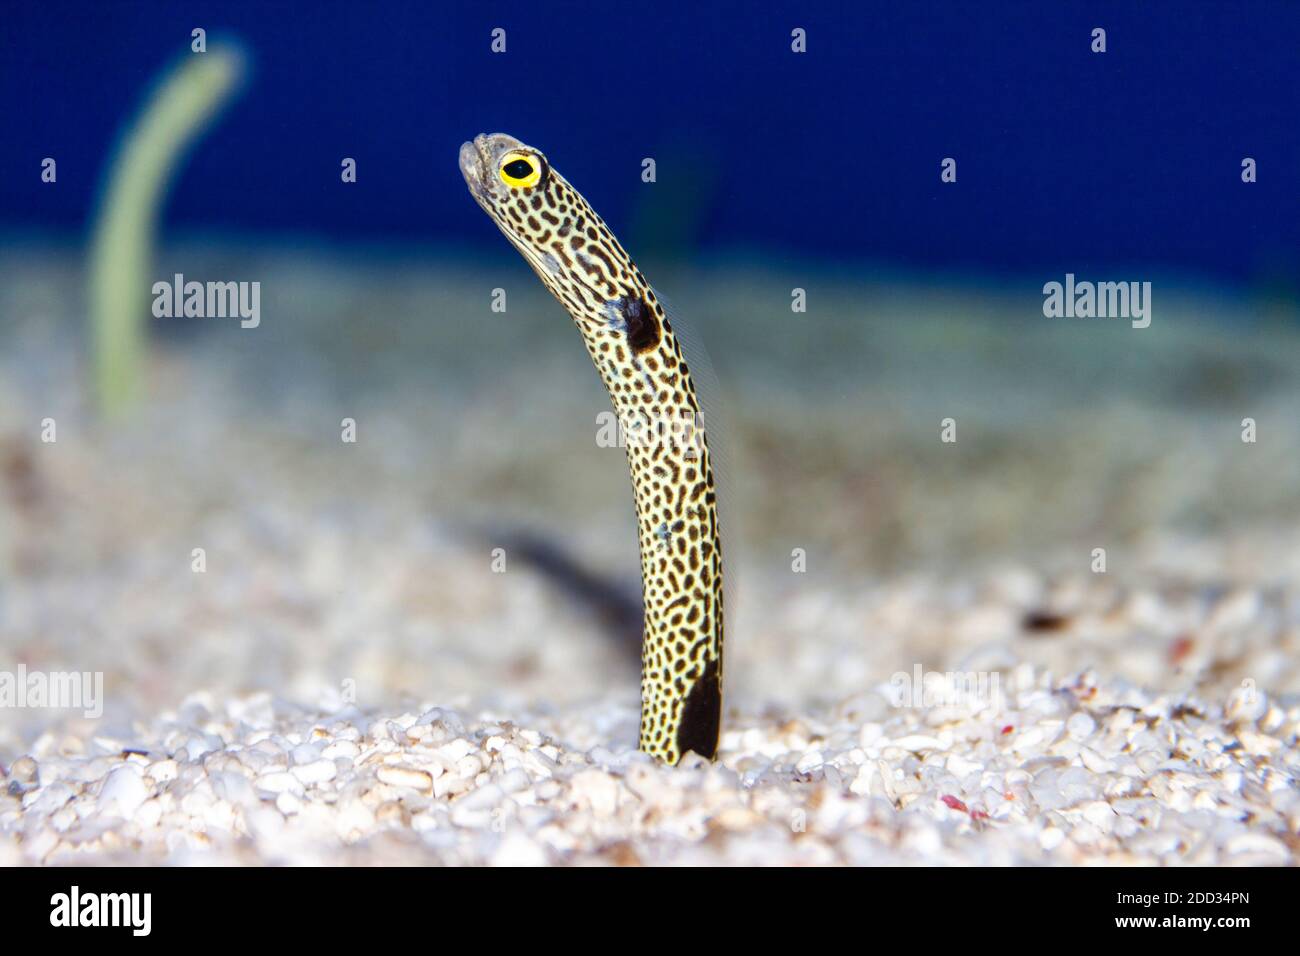 A closeup image of a small Garden Eel standing out the sand in an aquarium Stock Photo